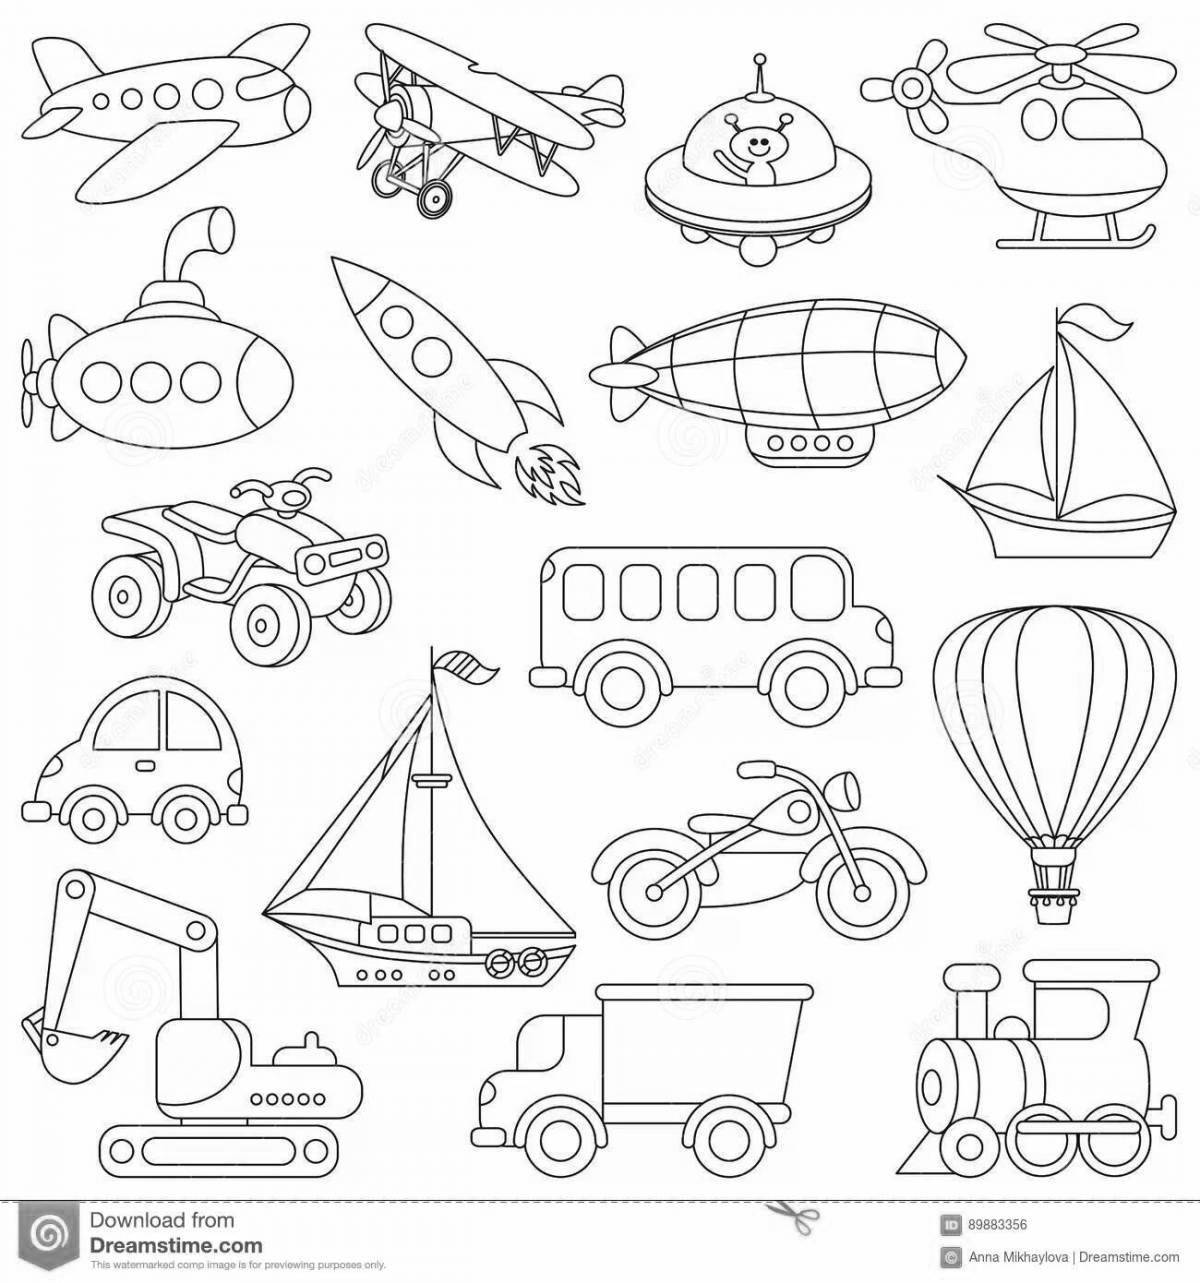 Exquisite air transport coloring page